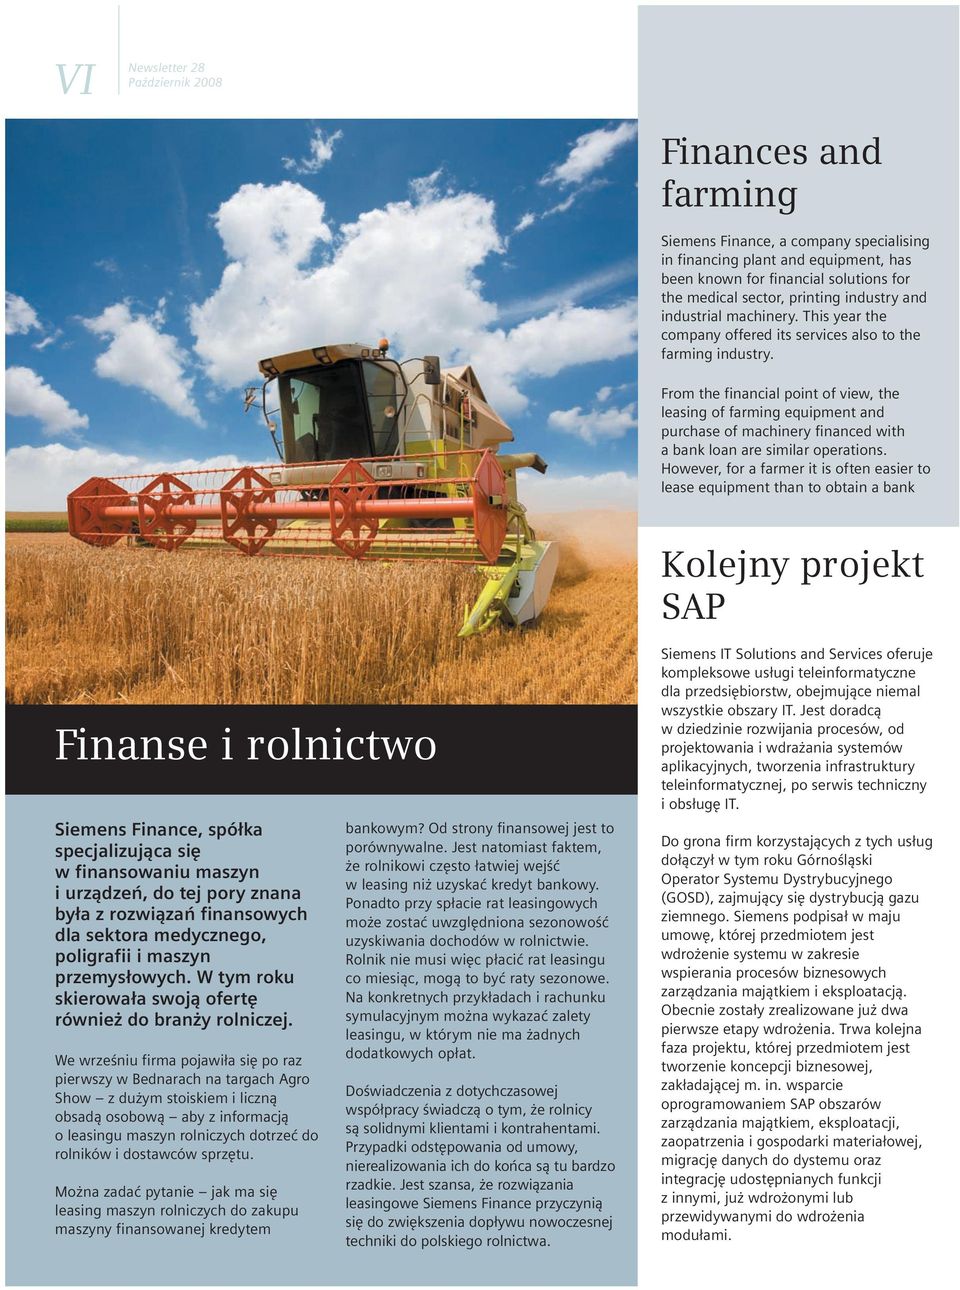 From the financial point of view, the leasing of farming equipment and purchase of machinery financed with a bank loan are similar operations.